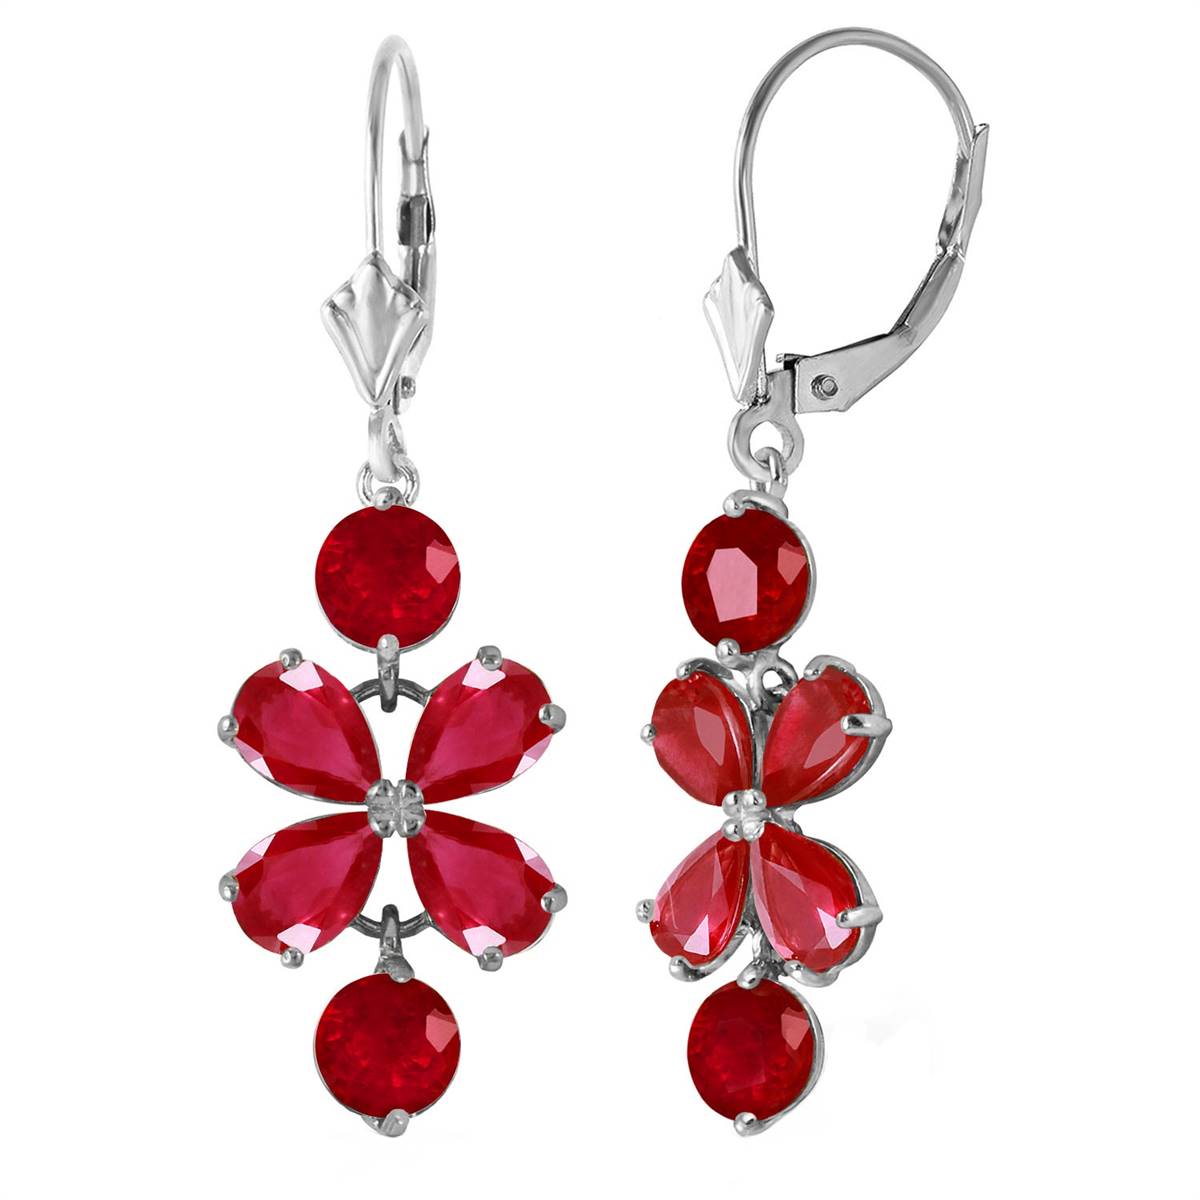 5.32 Carat 14K Solid White Gold Chandelier Earrings Natural Ruby